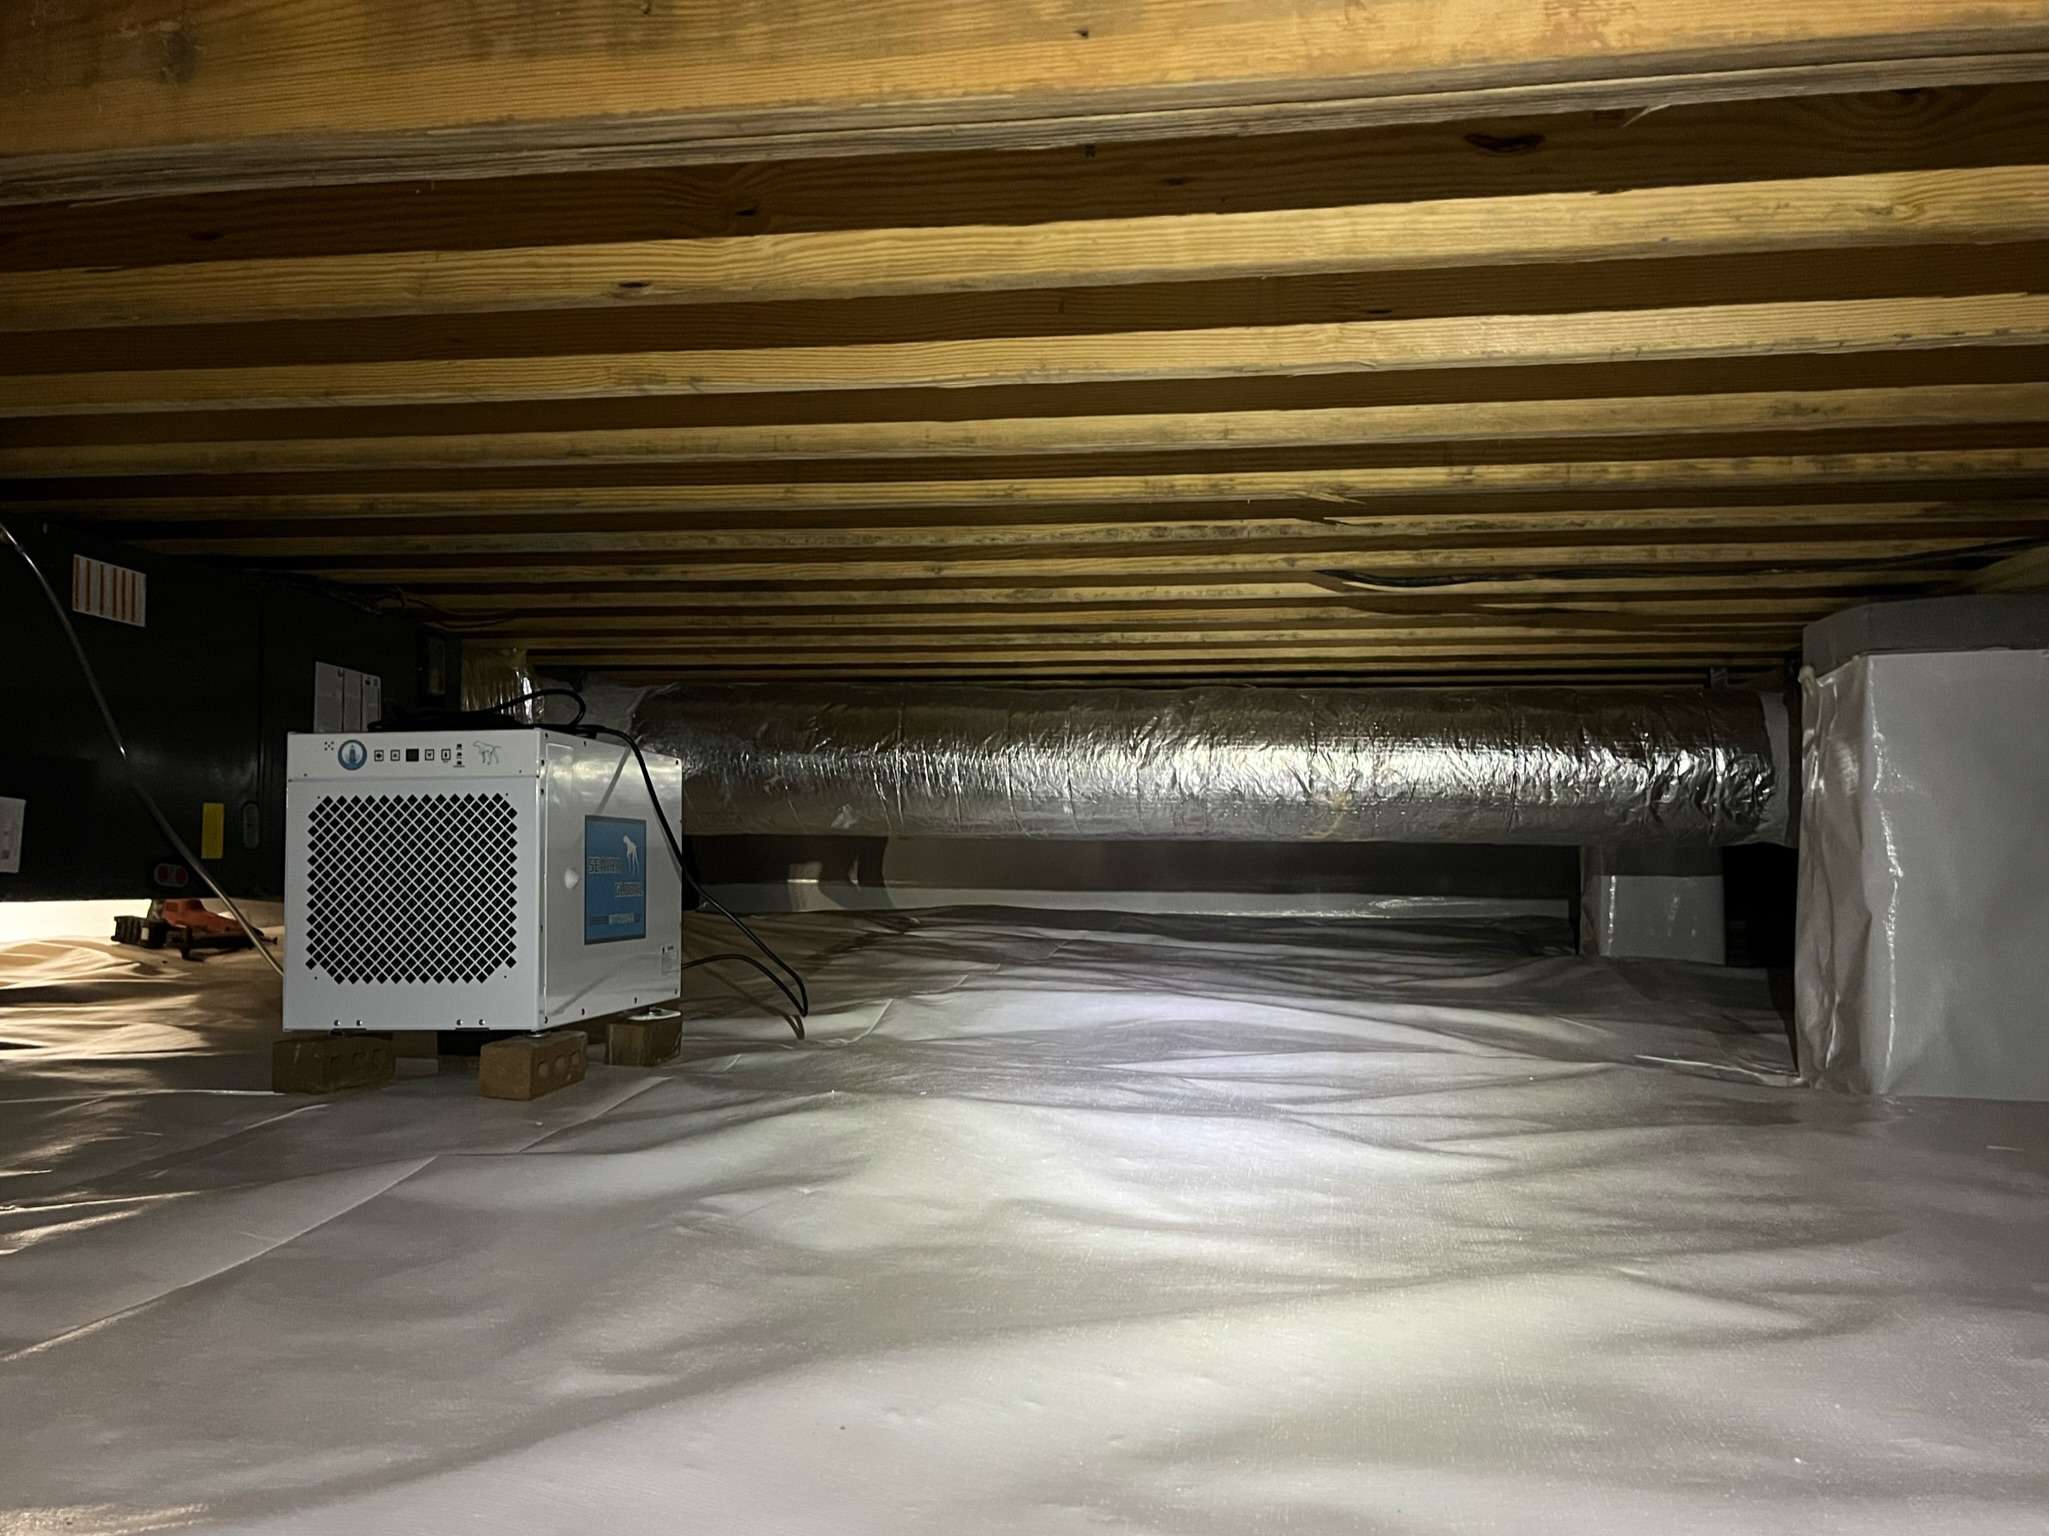 Crawl Space Encapsulation And Dehumidification In Asheville, Al A Comprehensive Humidity Solution (5)